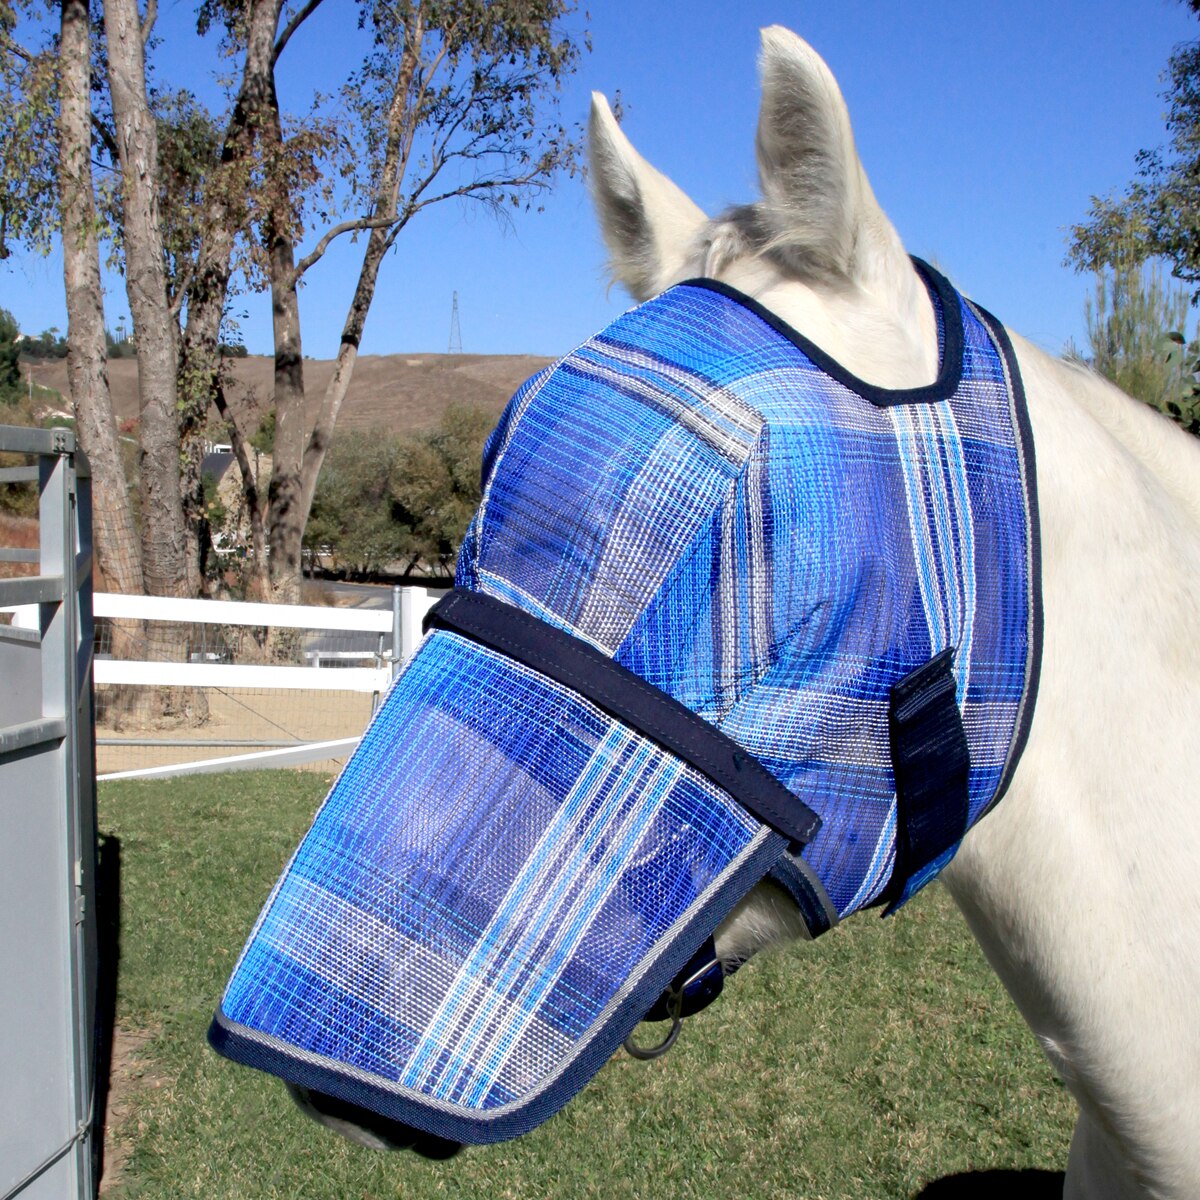 Kensington Signature Fly Mask with Removable Nose and Soft Mesh Ears — Protects Horses Face Nose and Ears From Biting Insects and UV Rays While Allowing Full Visibility 